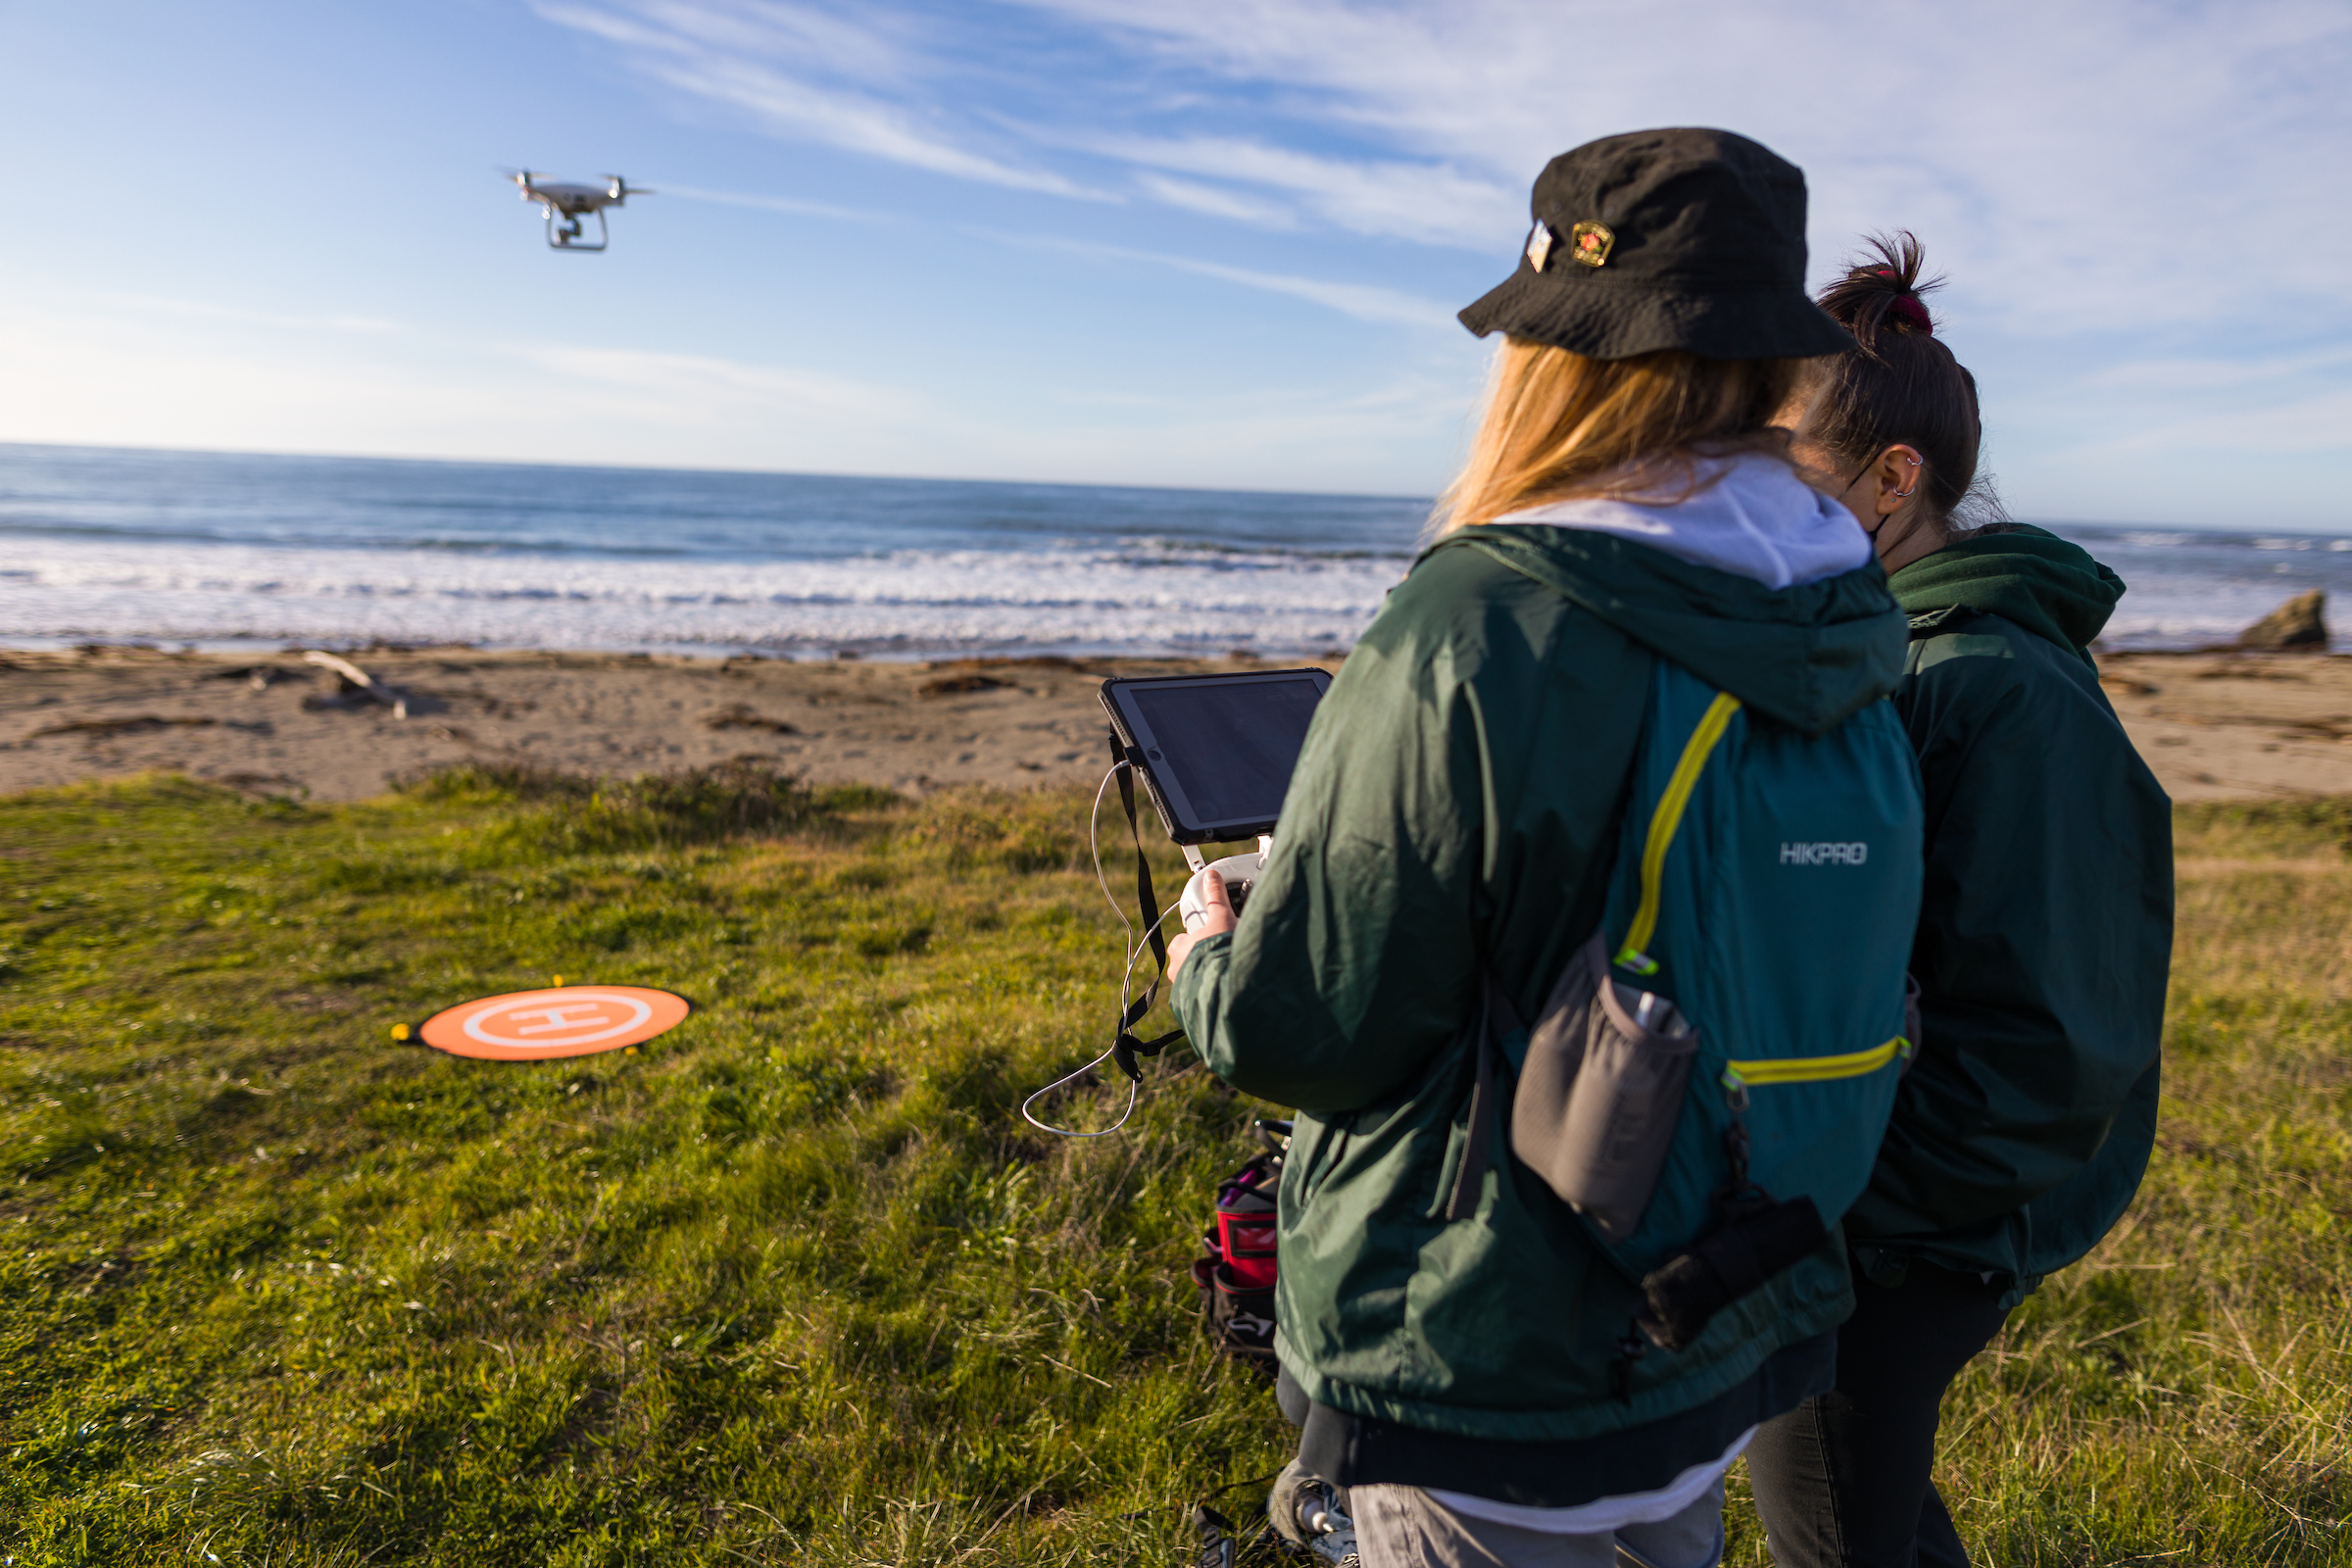 Graduate students Kate Riordan and Molly Murphy operate the drone at one of the beaches in the Piedras Blancas rookery. NMFS permit #22187-02